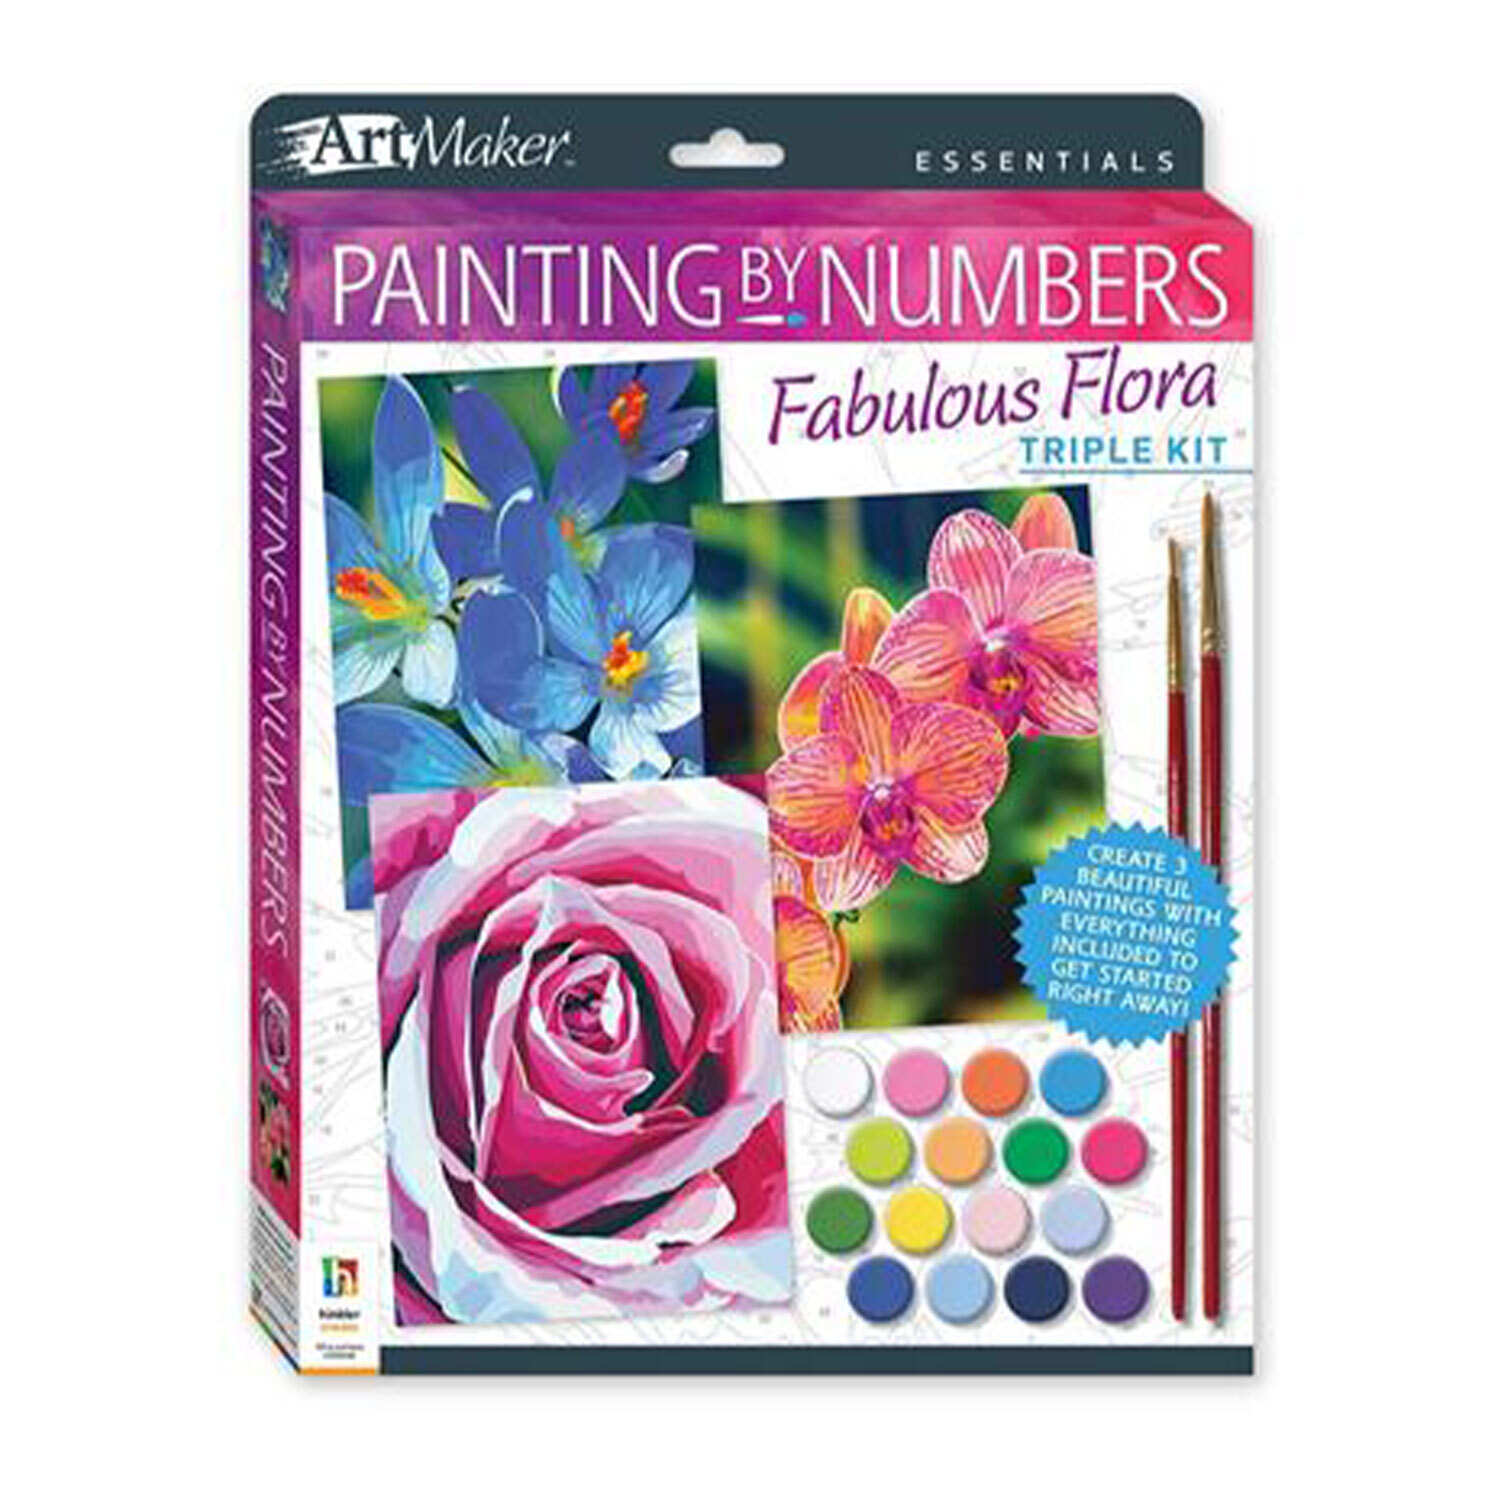 Painting by Numbers Fabulous Flora Image